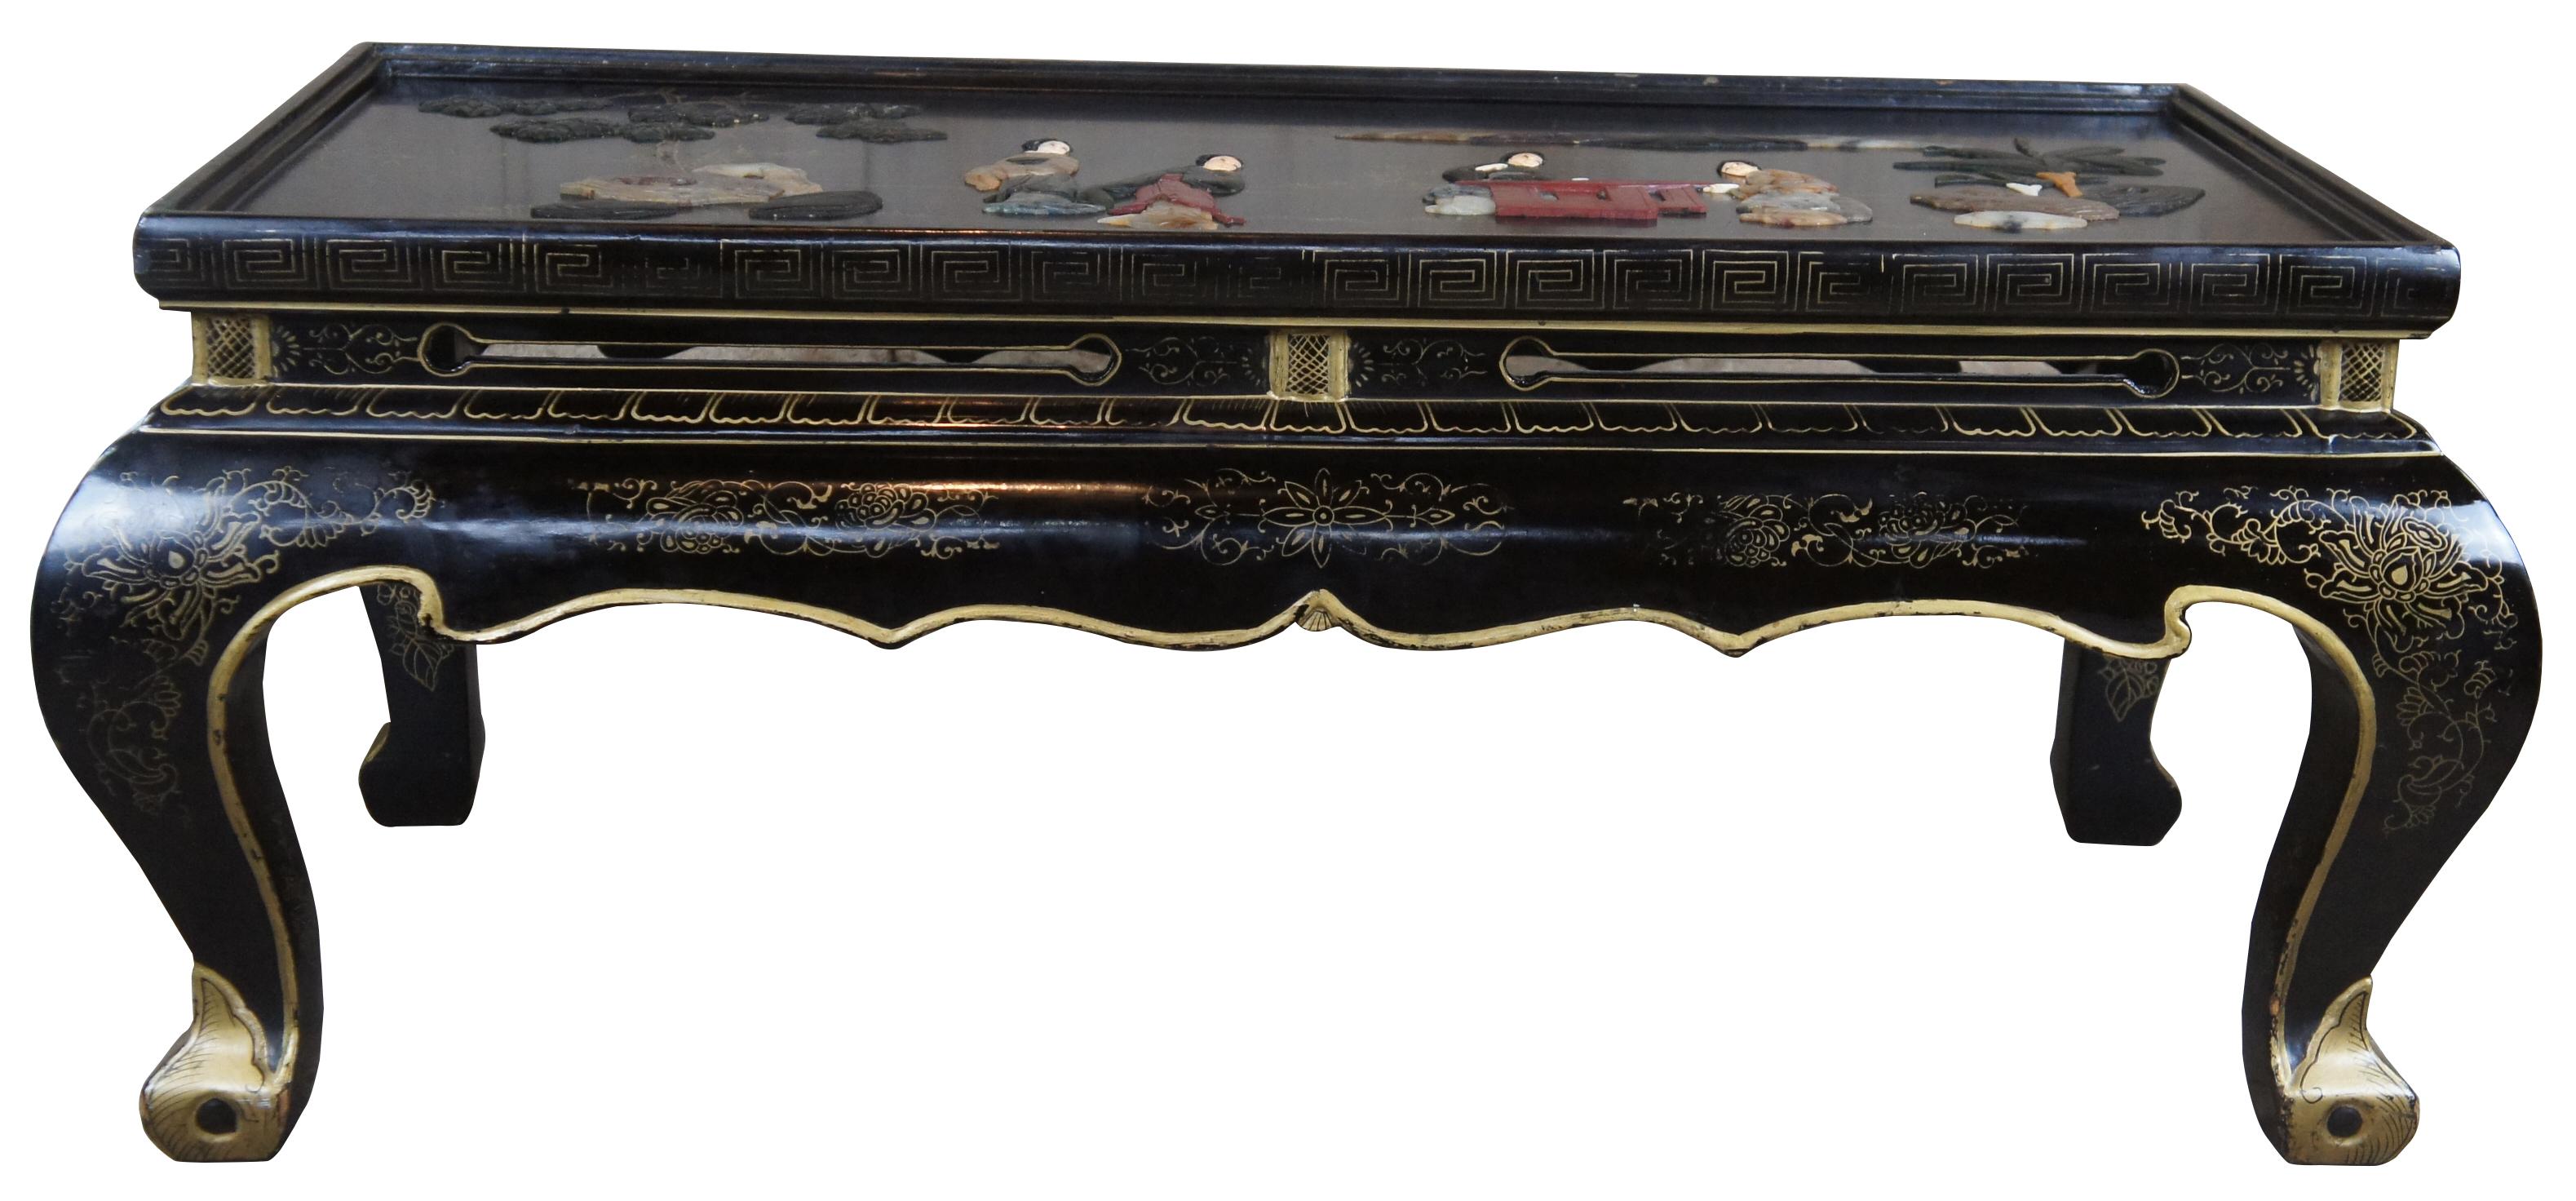 Vintage Chinese chinoiserie tea / coffee table. Carved and finished in black with soapstone geisha scenes and gold accents with greek key and florals with serpentine base and cabriole legs.
 